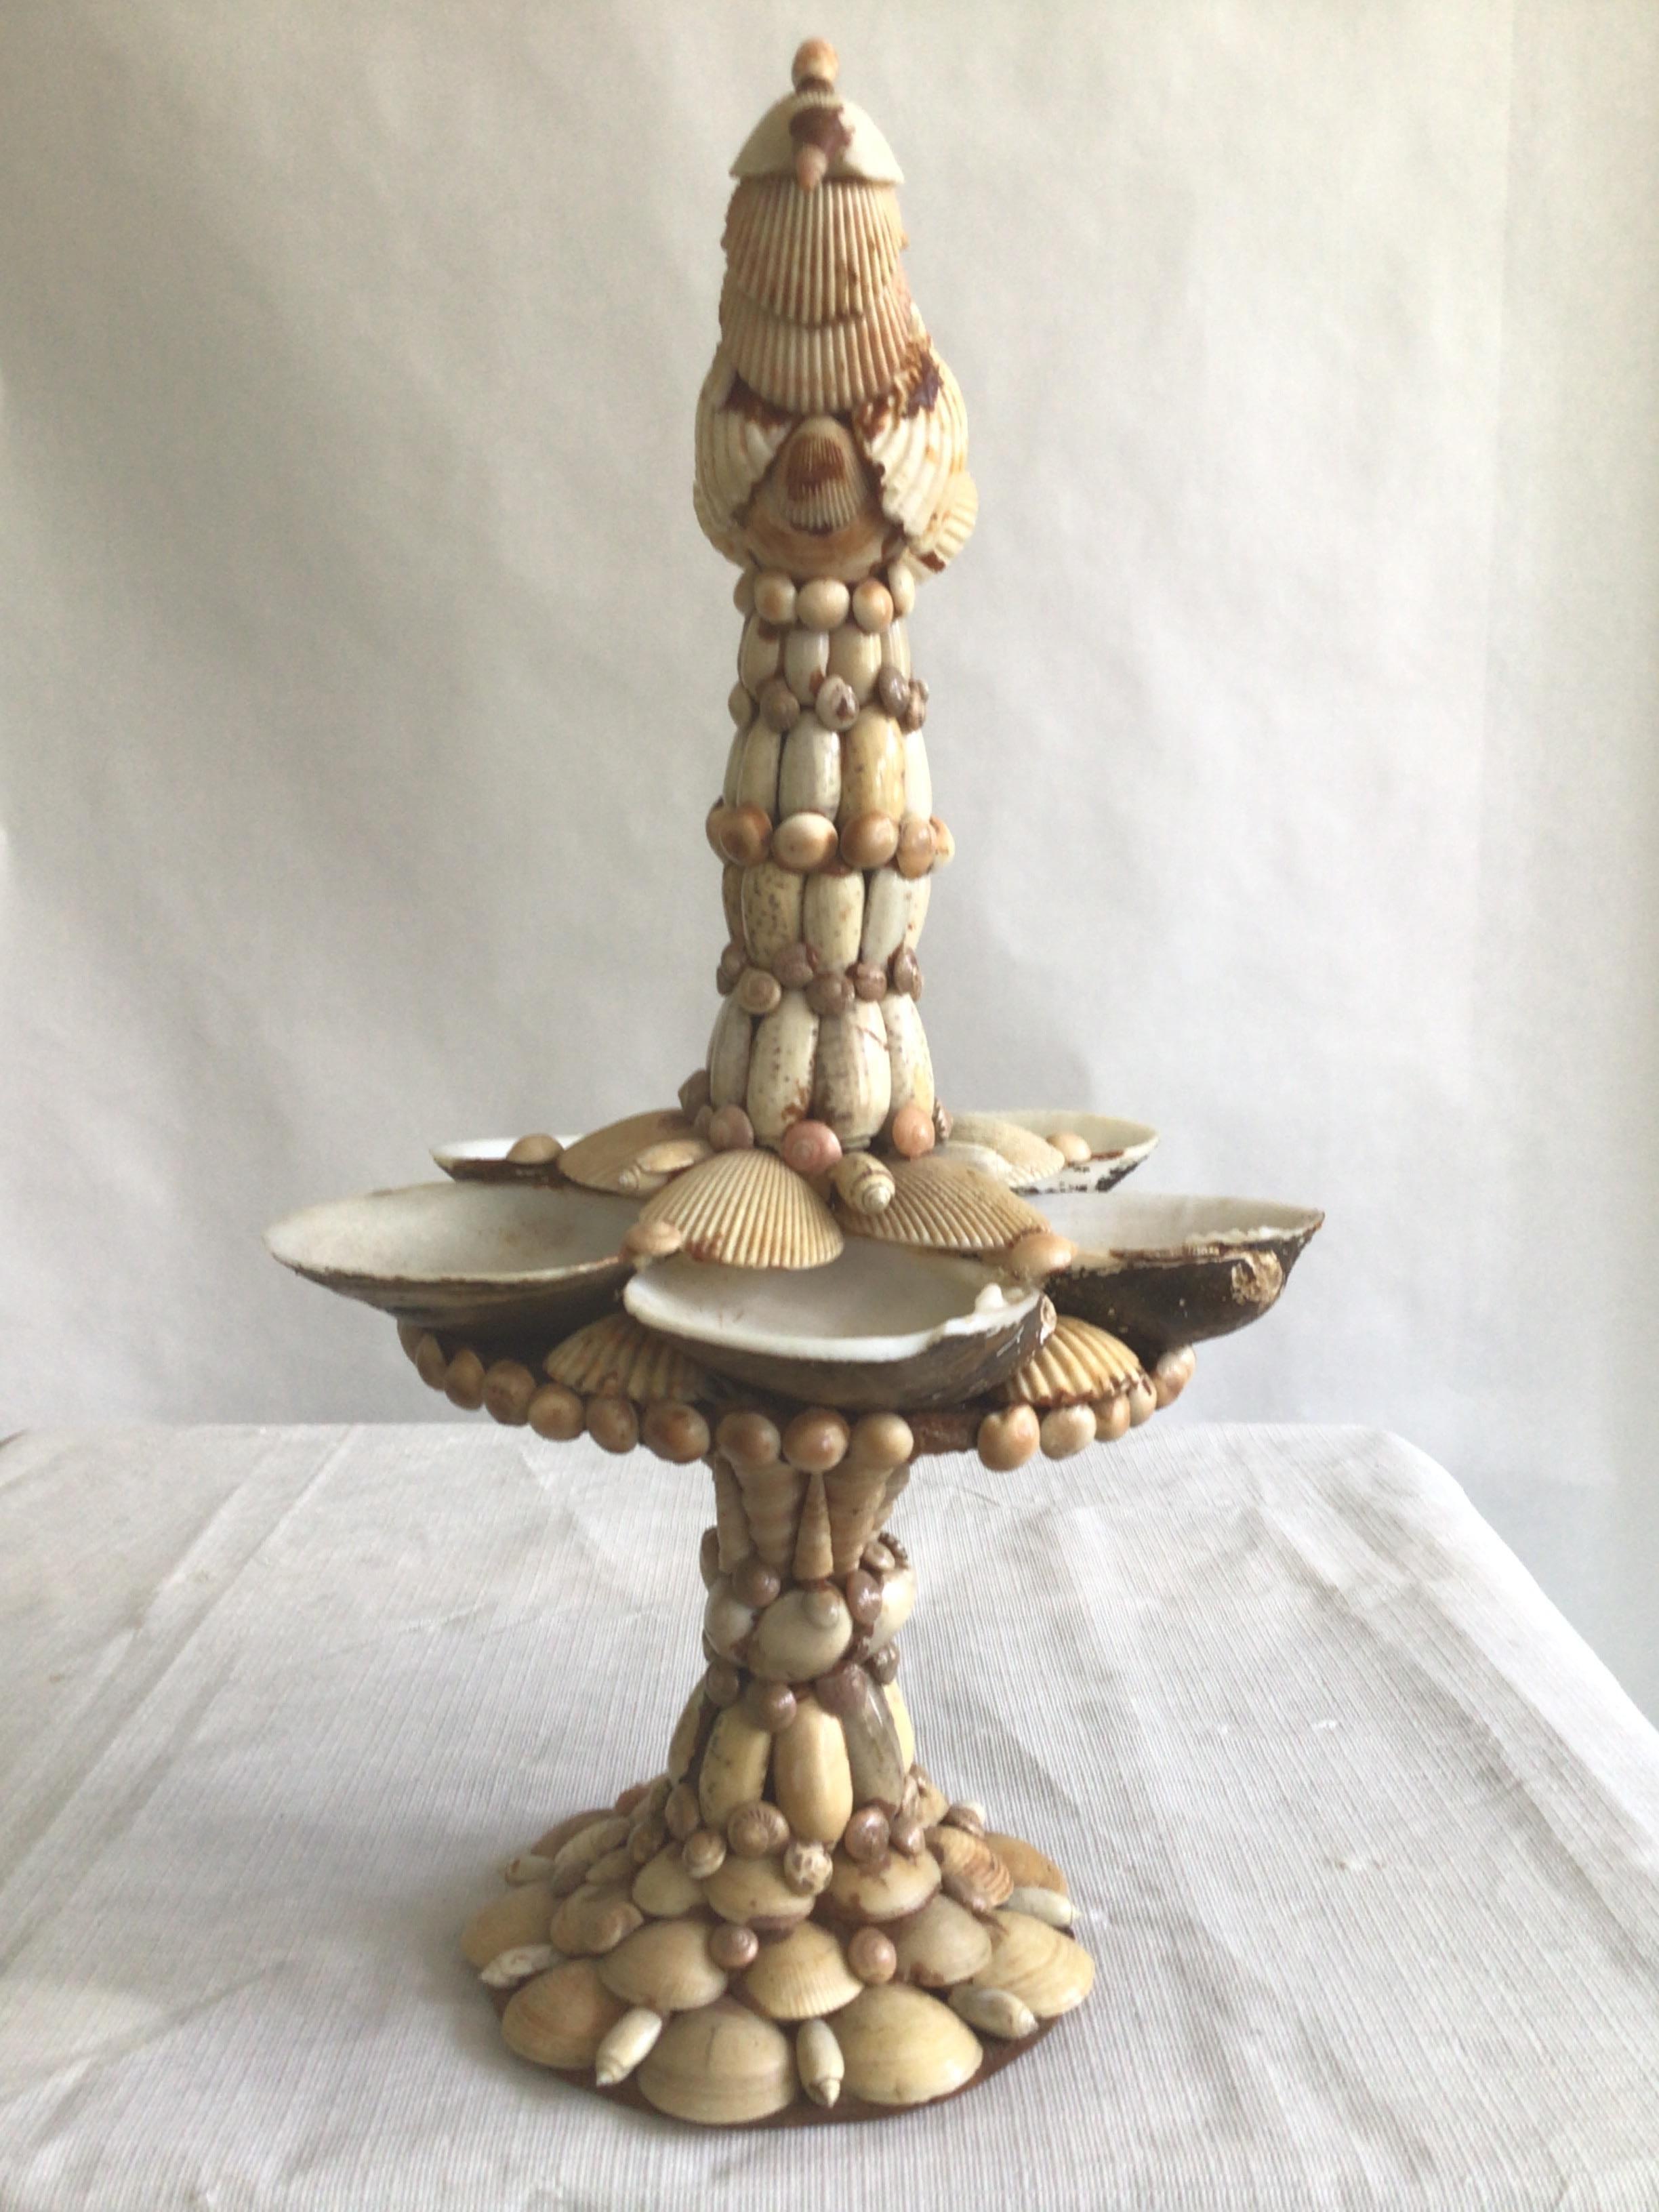 1960s Shell Bird Sculpture
A perfect choice for a tabletop display/servewear
Nautical
